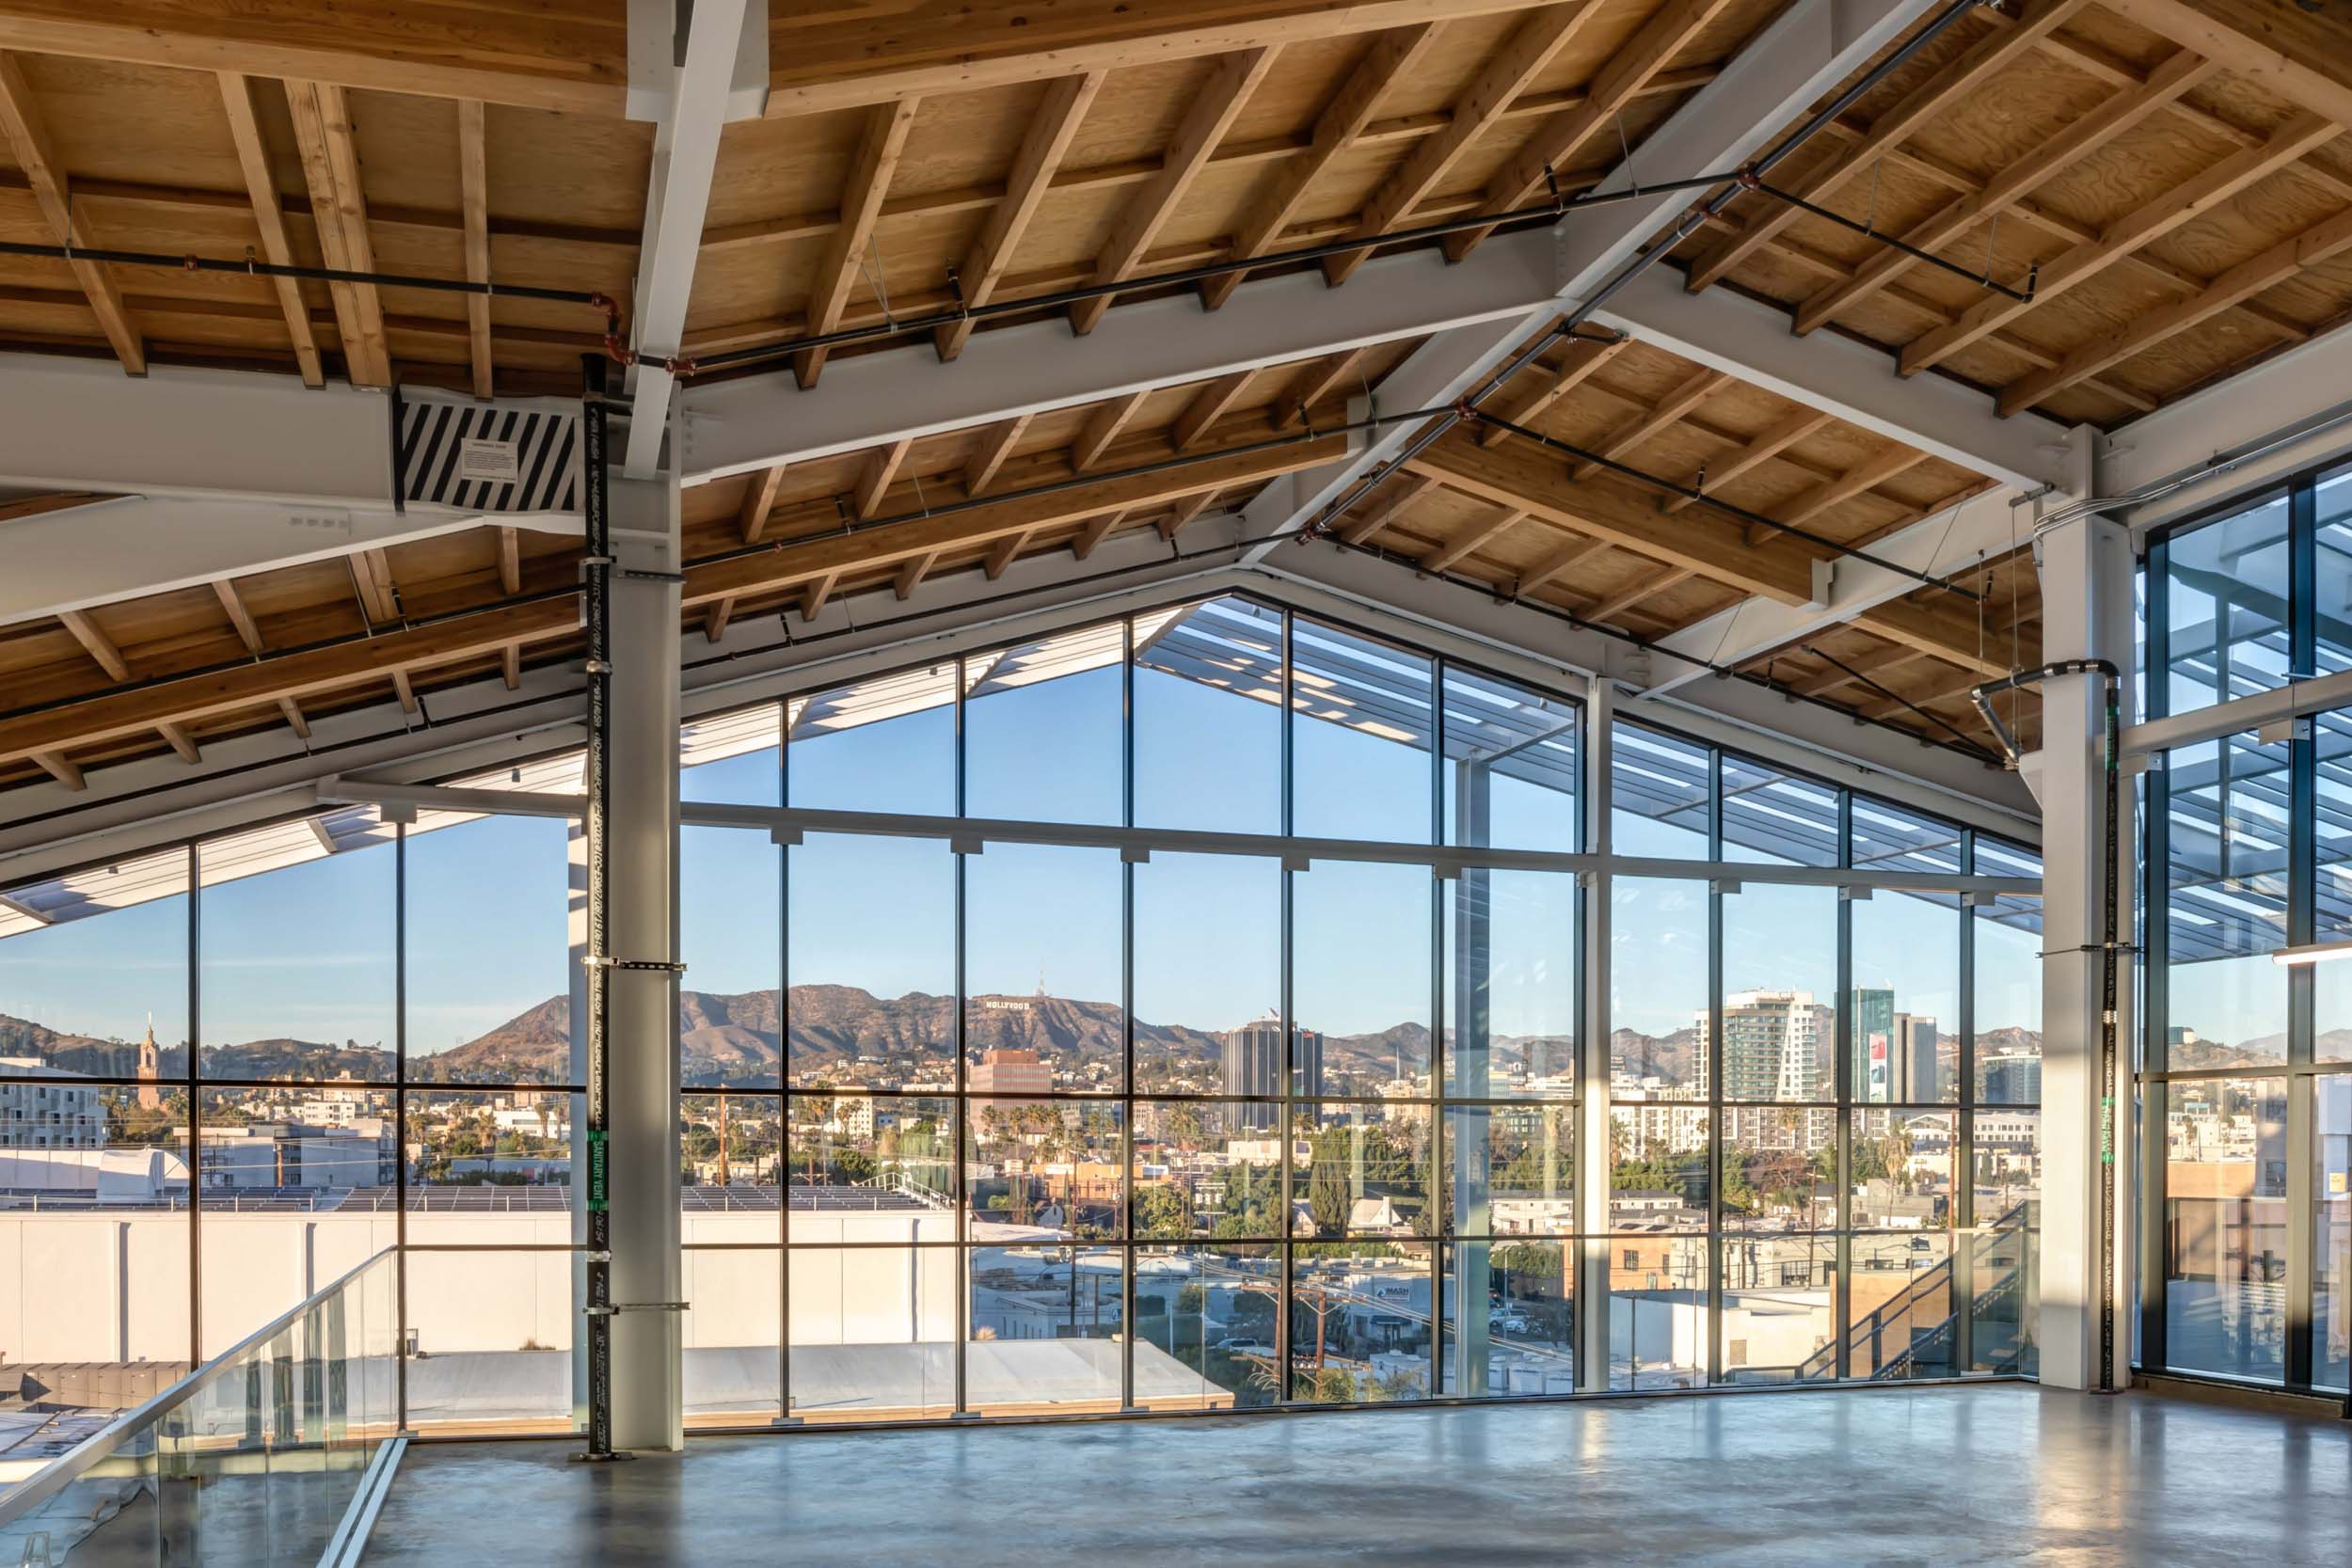 Inside the building at Harlow looking out the floor-to-ceiling windows at the Hollywood Hills